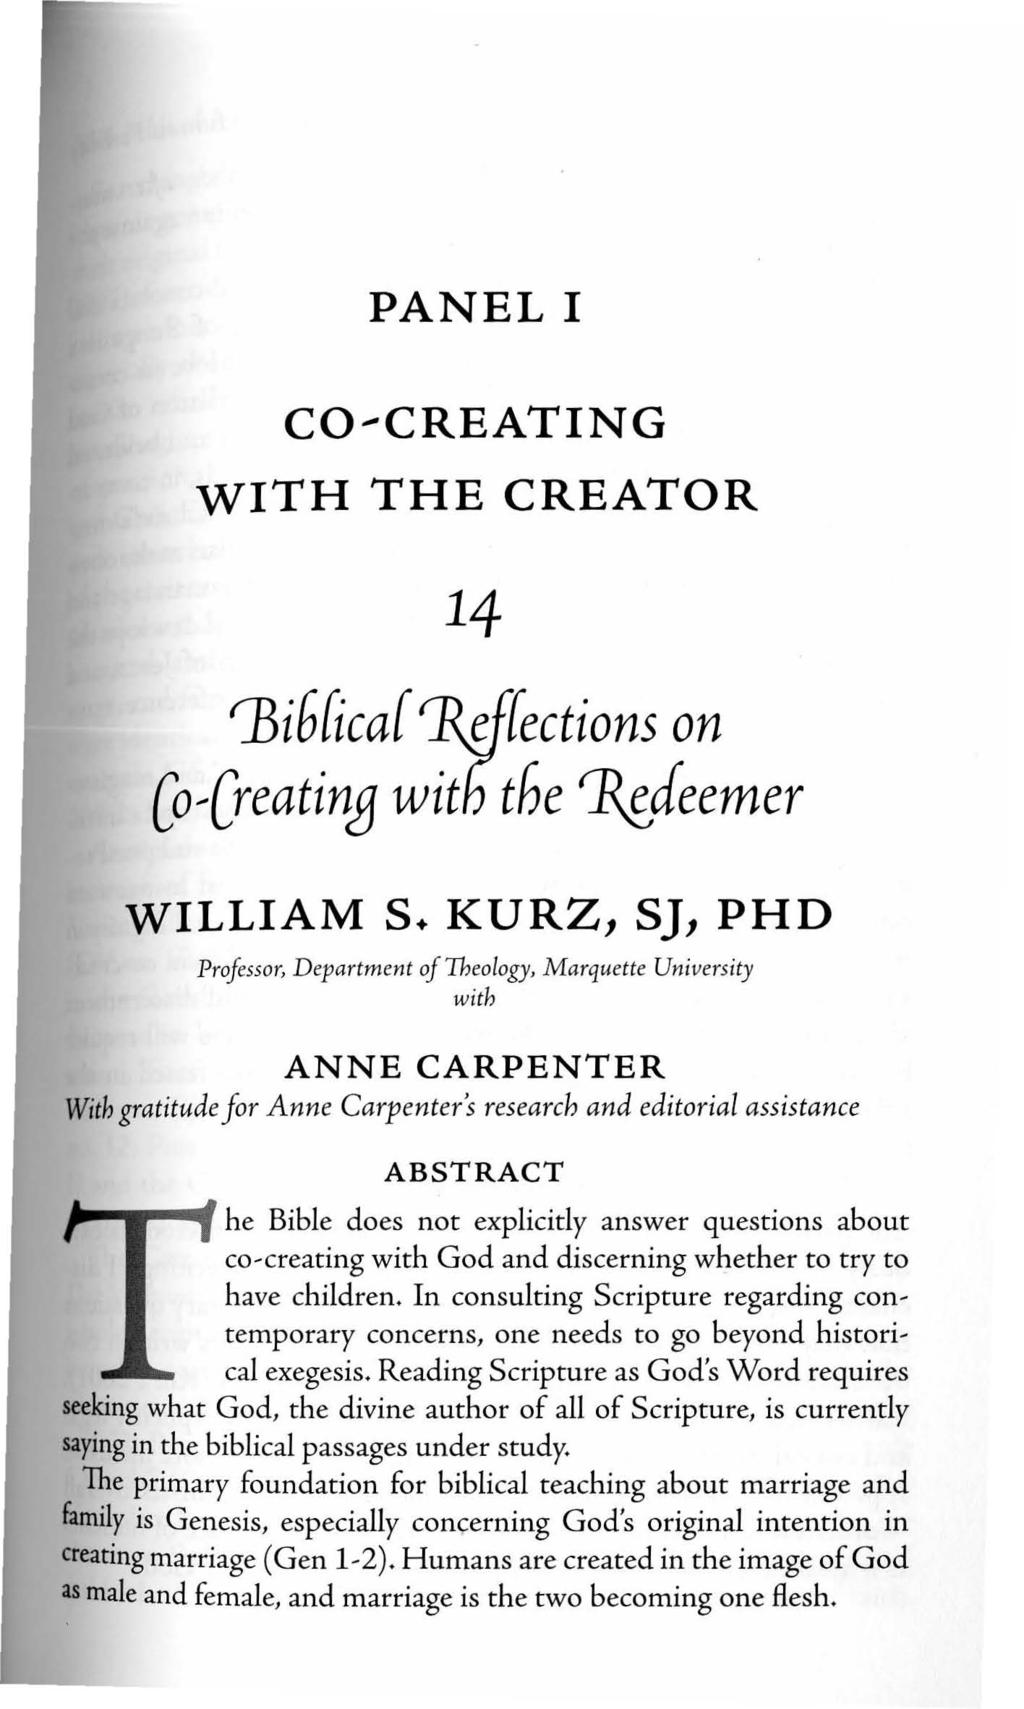 PANEL I CO--CREATING WITH THE CREATOR 14 'Bi6{ica{ 1\ef{ections on Co~Creating with the ~cfeemer WILLIAM S+ KURZ, S], PHD Professor, Department of Theology, Marquette Uni versity with ANNE CARPENTER